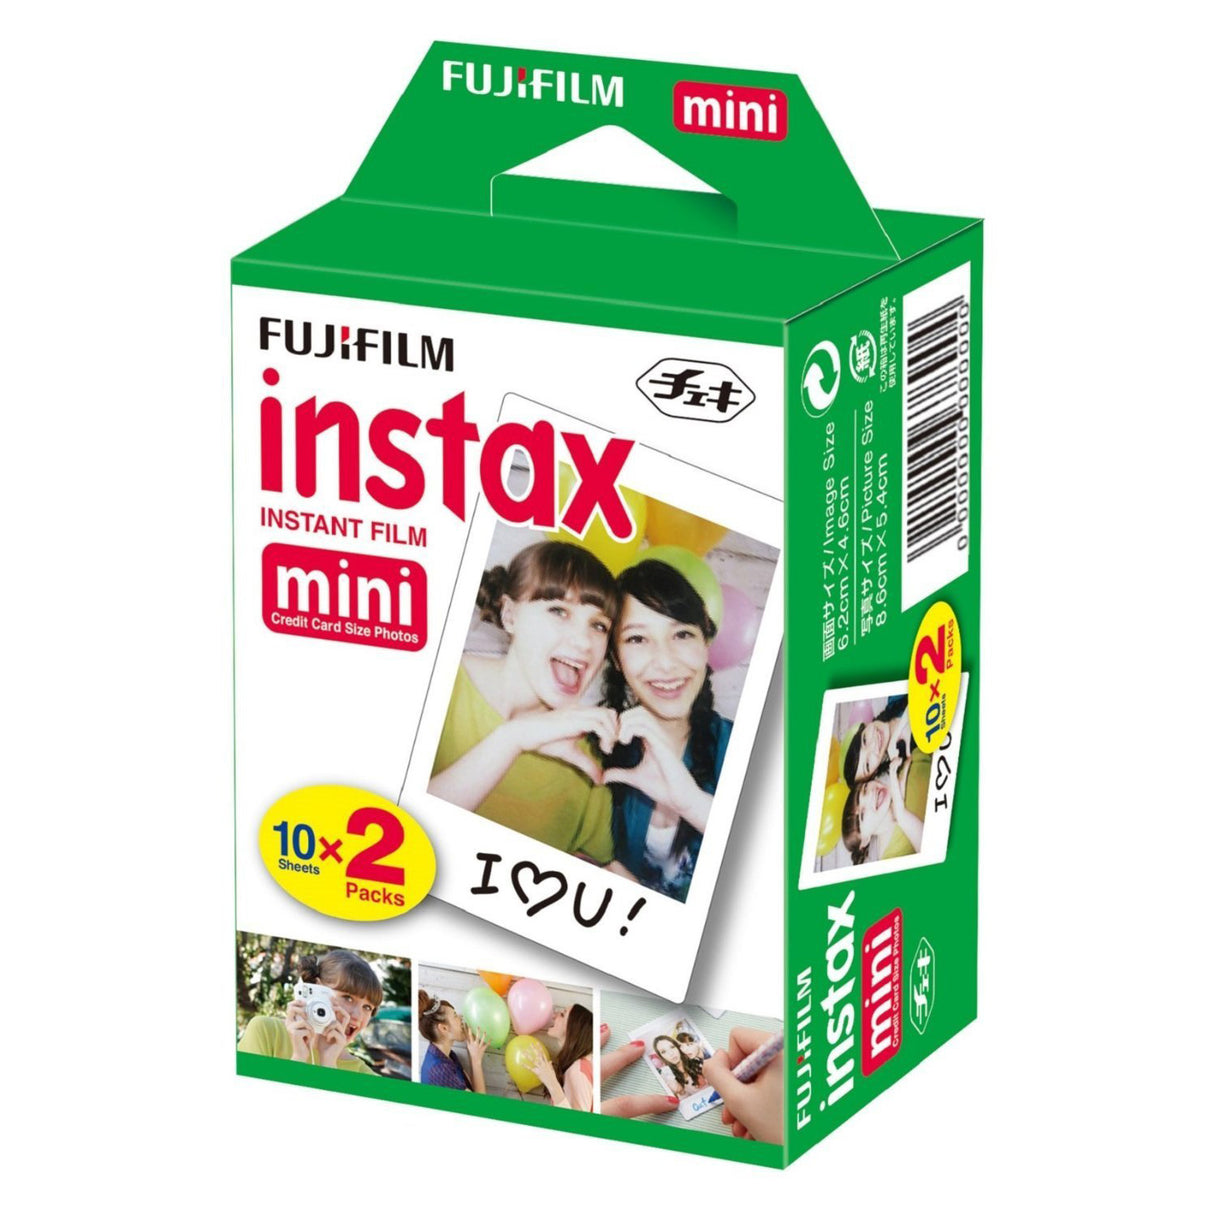 Fujifilm Instax Mini 12 Instant Camera with Case, 60 Fuji Films, Decoration  Stickers, Frames, Photo Album and More Accessory kit (Mint Green) 